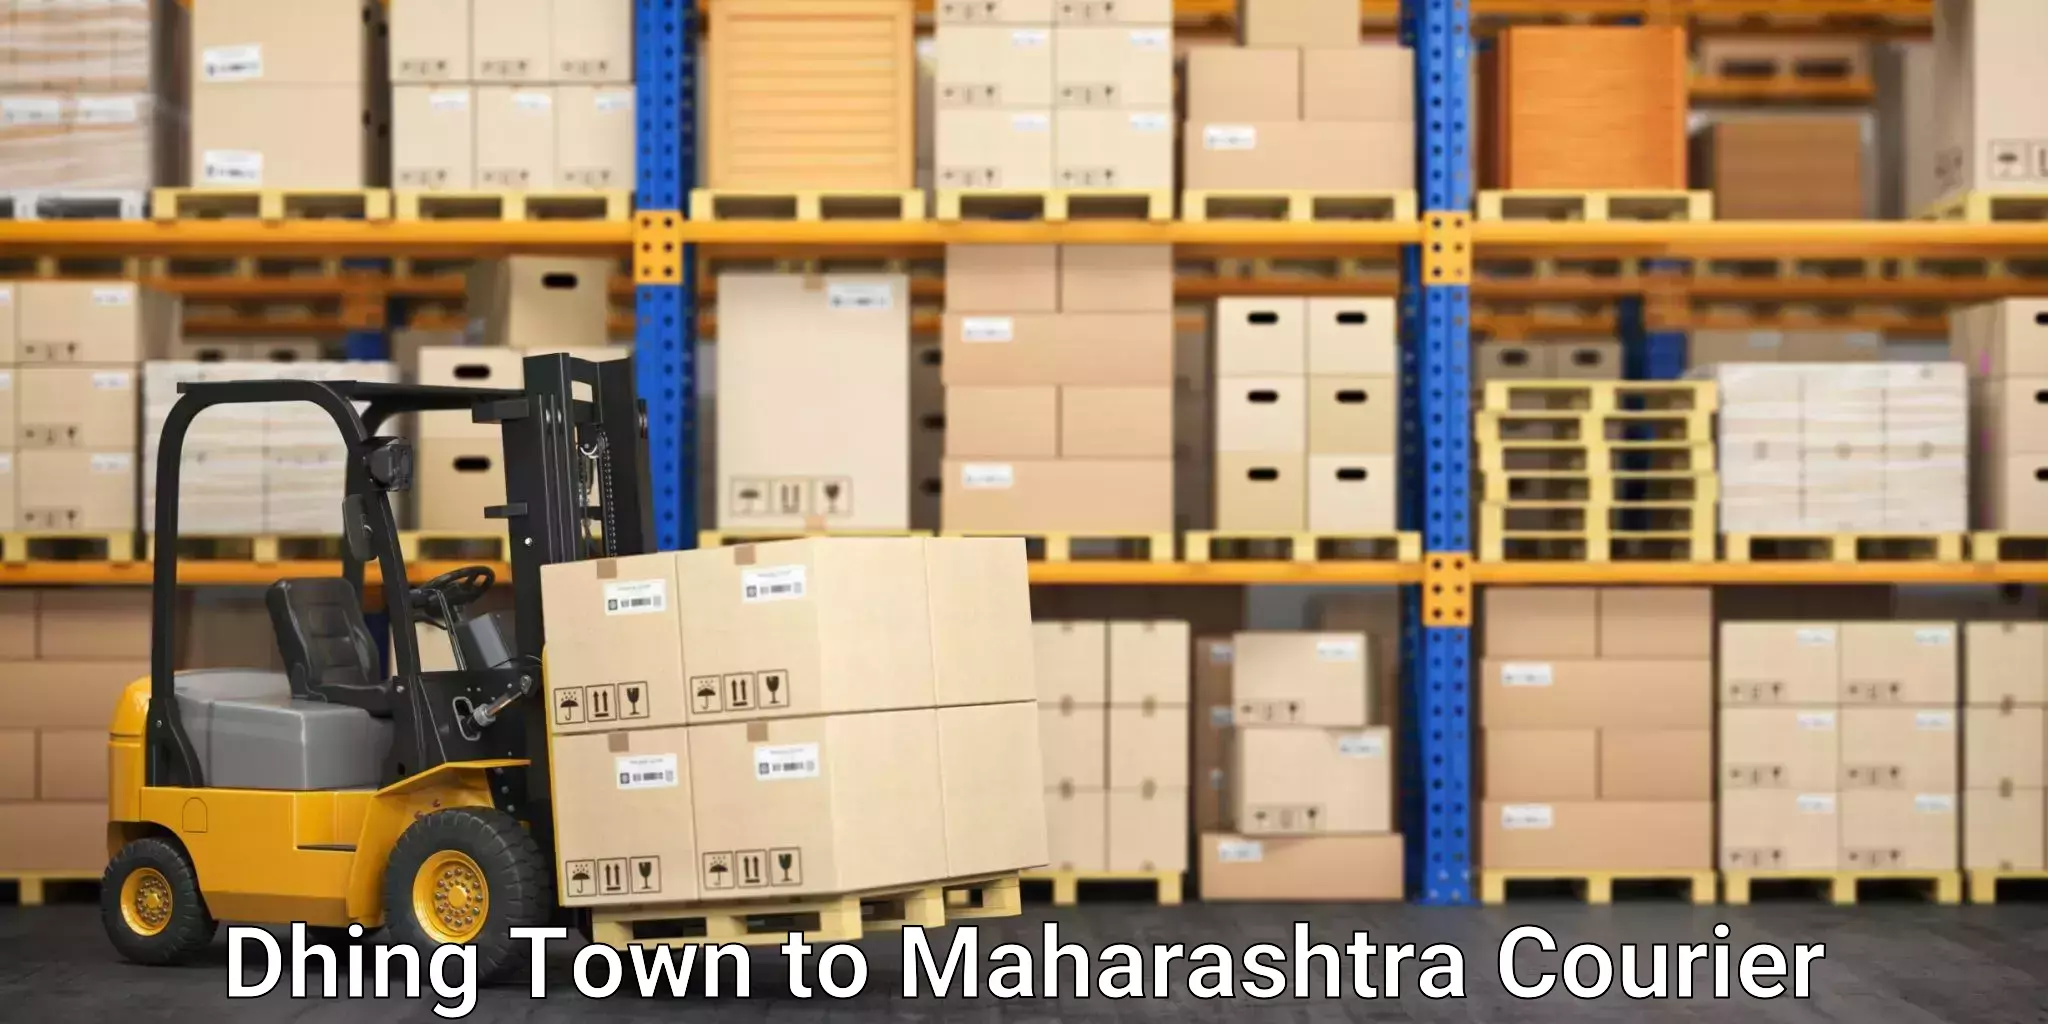 Courier service efficiency Dhing Town to Mumbai Port